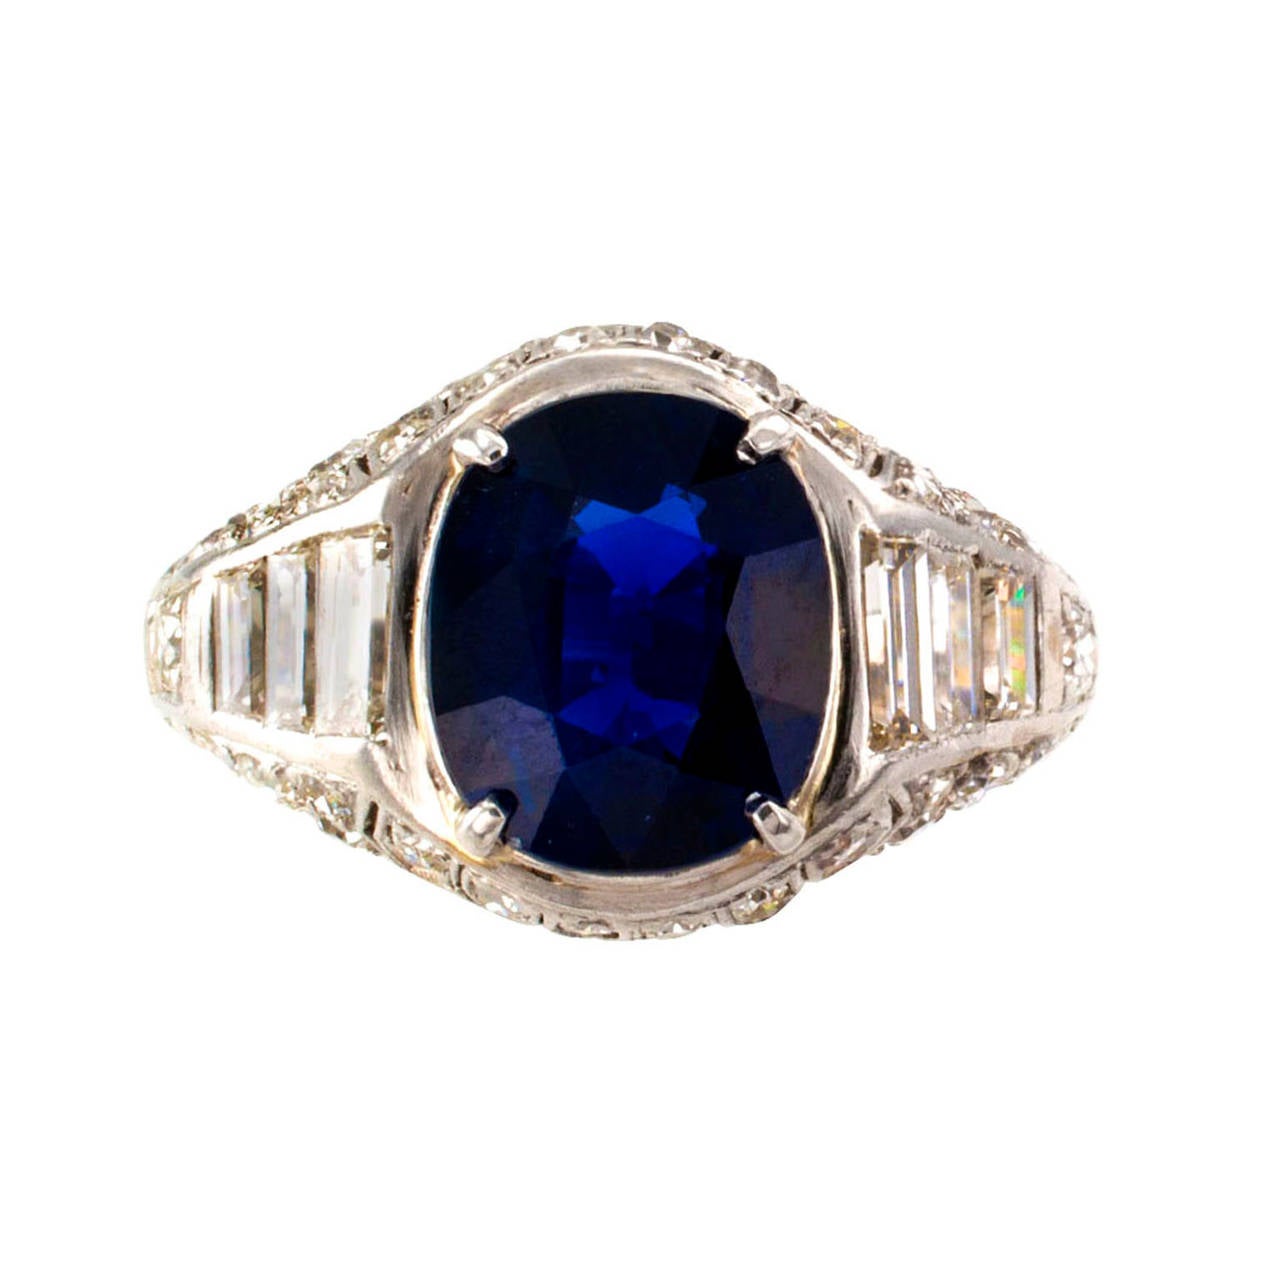 Unheated 2.93 Carats Blue Sapphire and Diamond Art Deco Ring

Accompanied by a report from American Gemological Laboratories stating that the sapphire weights 2.93 carats, of Burmese origin, not heated natural blue color.  A rare gem kindled into